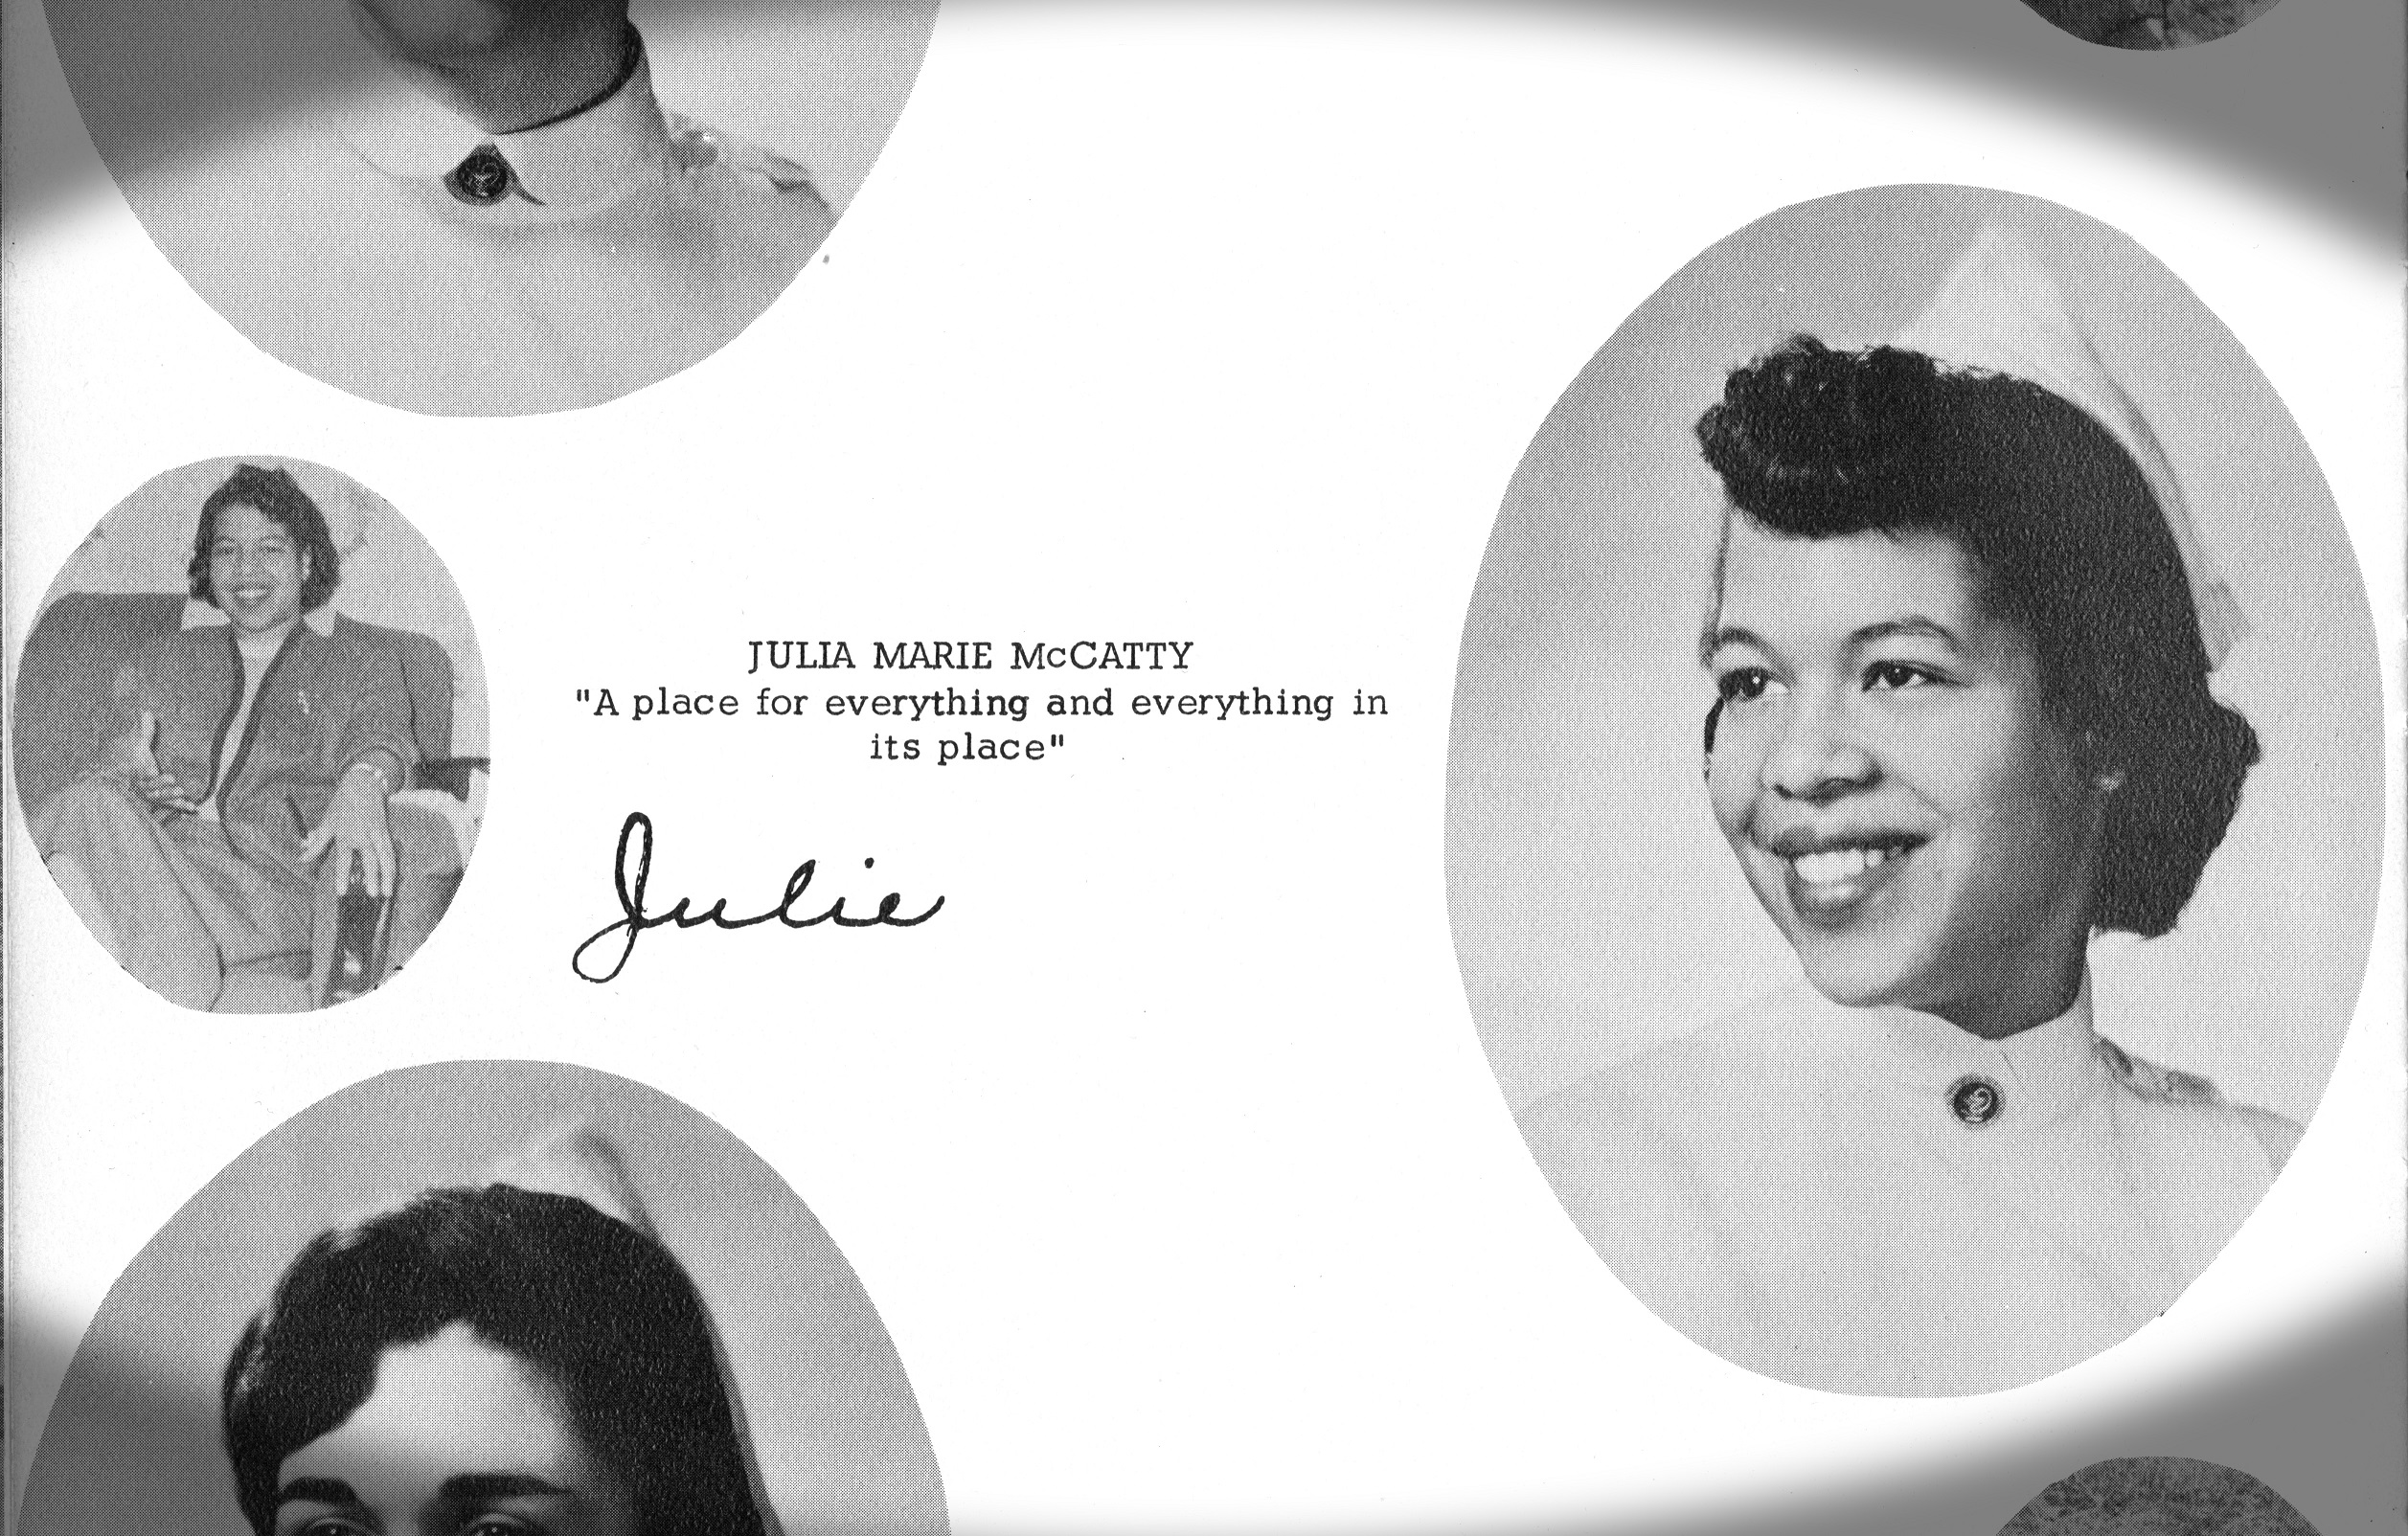 Black and white photos of Julia Marie McCatty surrounding text which reads "Julia Marie McCatty: 'A place for everything and everything in its place'" and a handwritten "Julie"